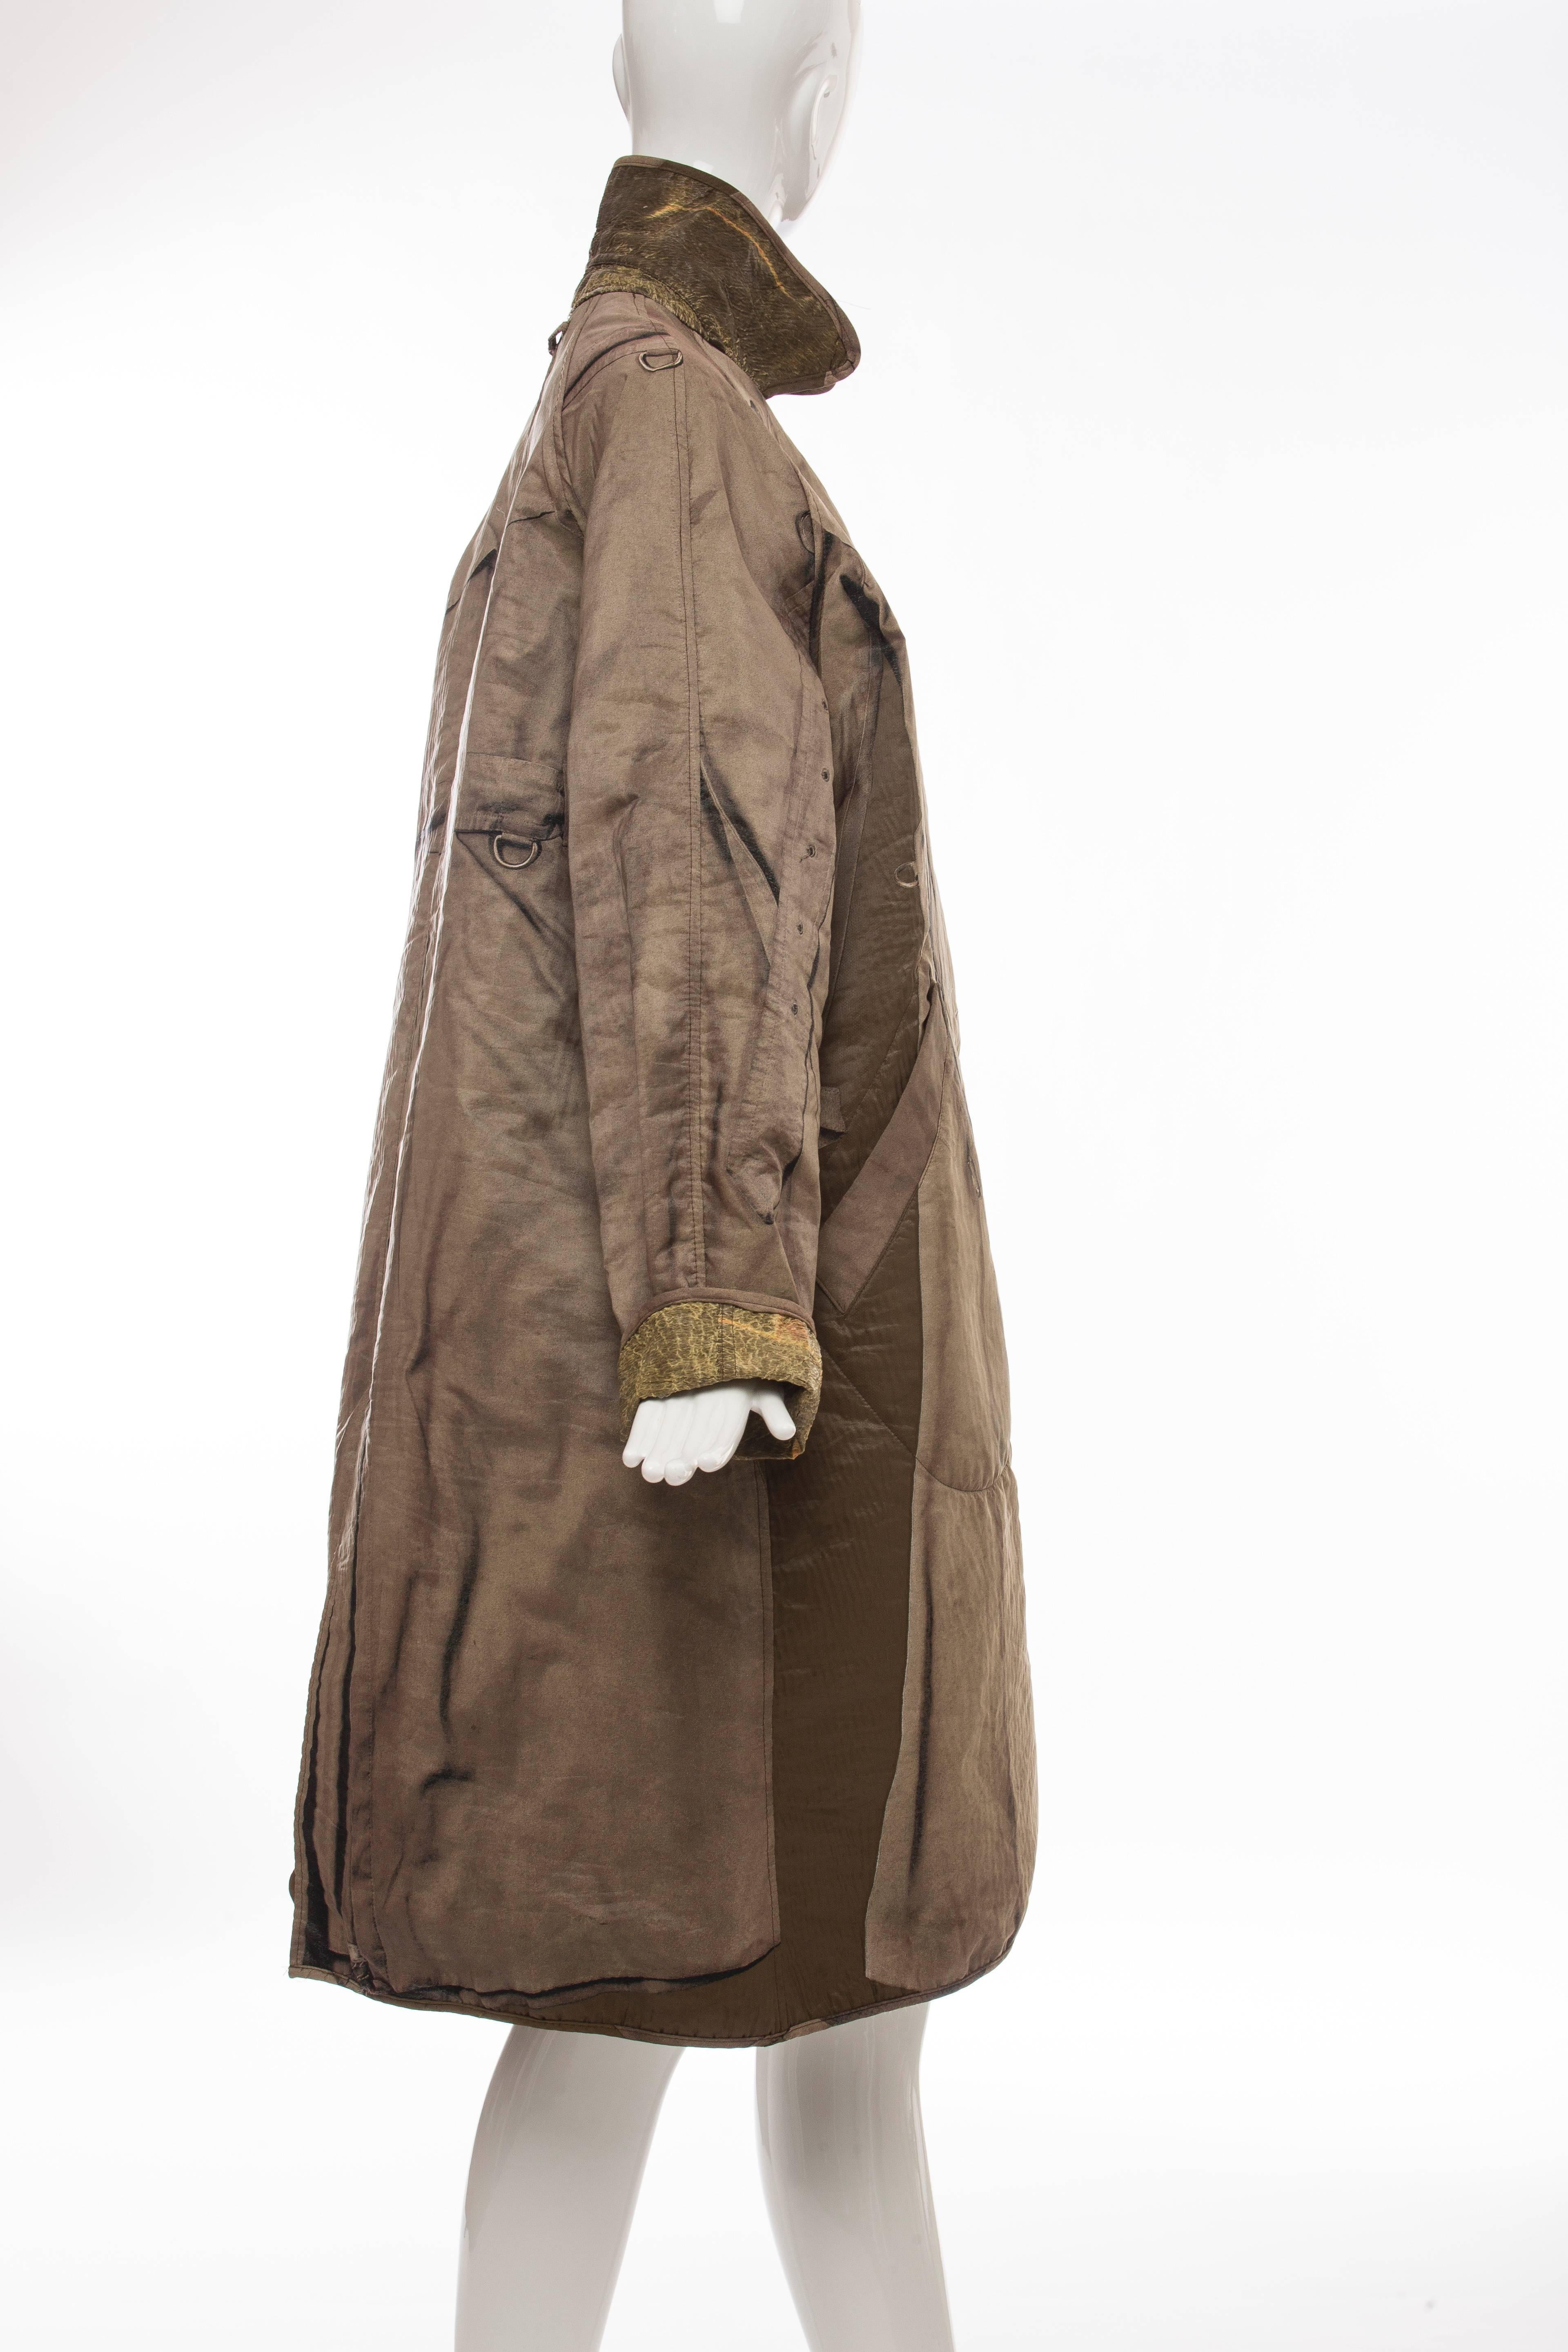 Jean Paul Gaultier, Autumn-Winter 2004, reversible tromp l'oeil trench coat with dual slit pockets at waist, Peter Pan collar, vent at back and button closures at front. 

Size not listed, estimated from measurements.

 Bust 46”, Waist 50”,